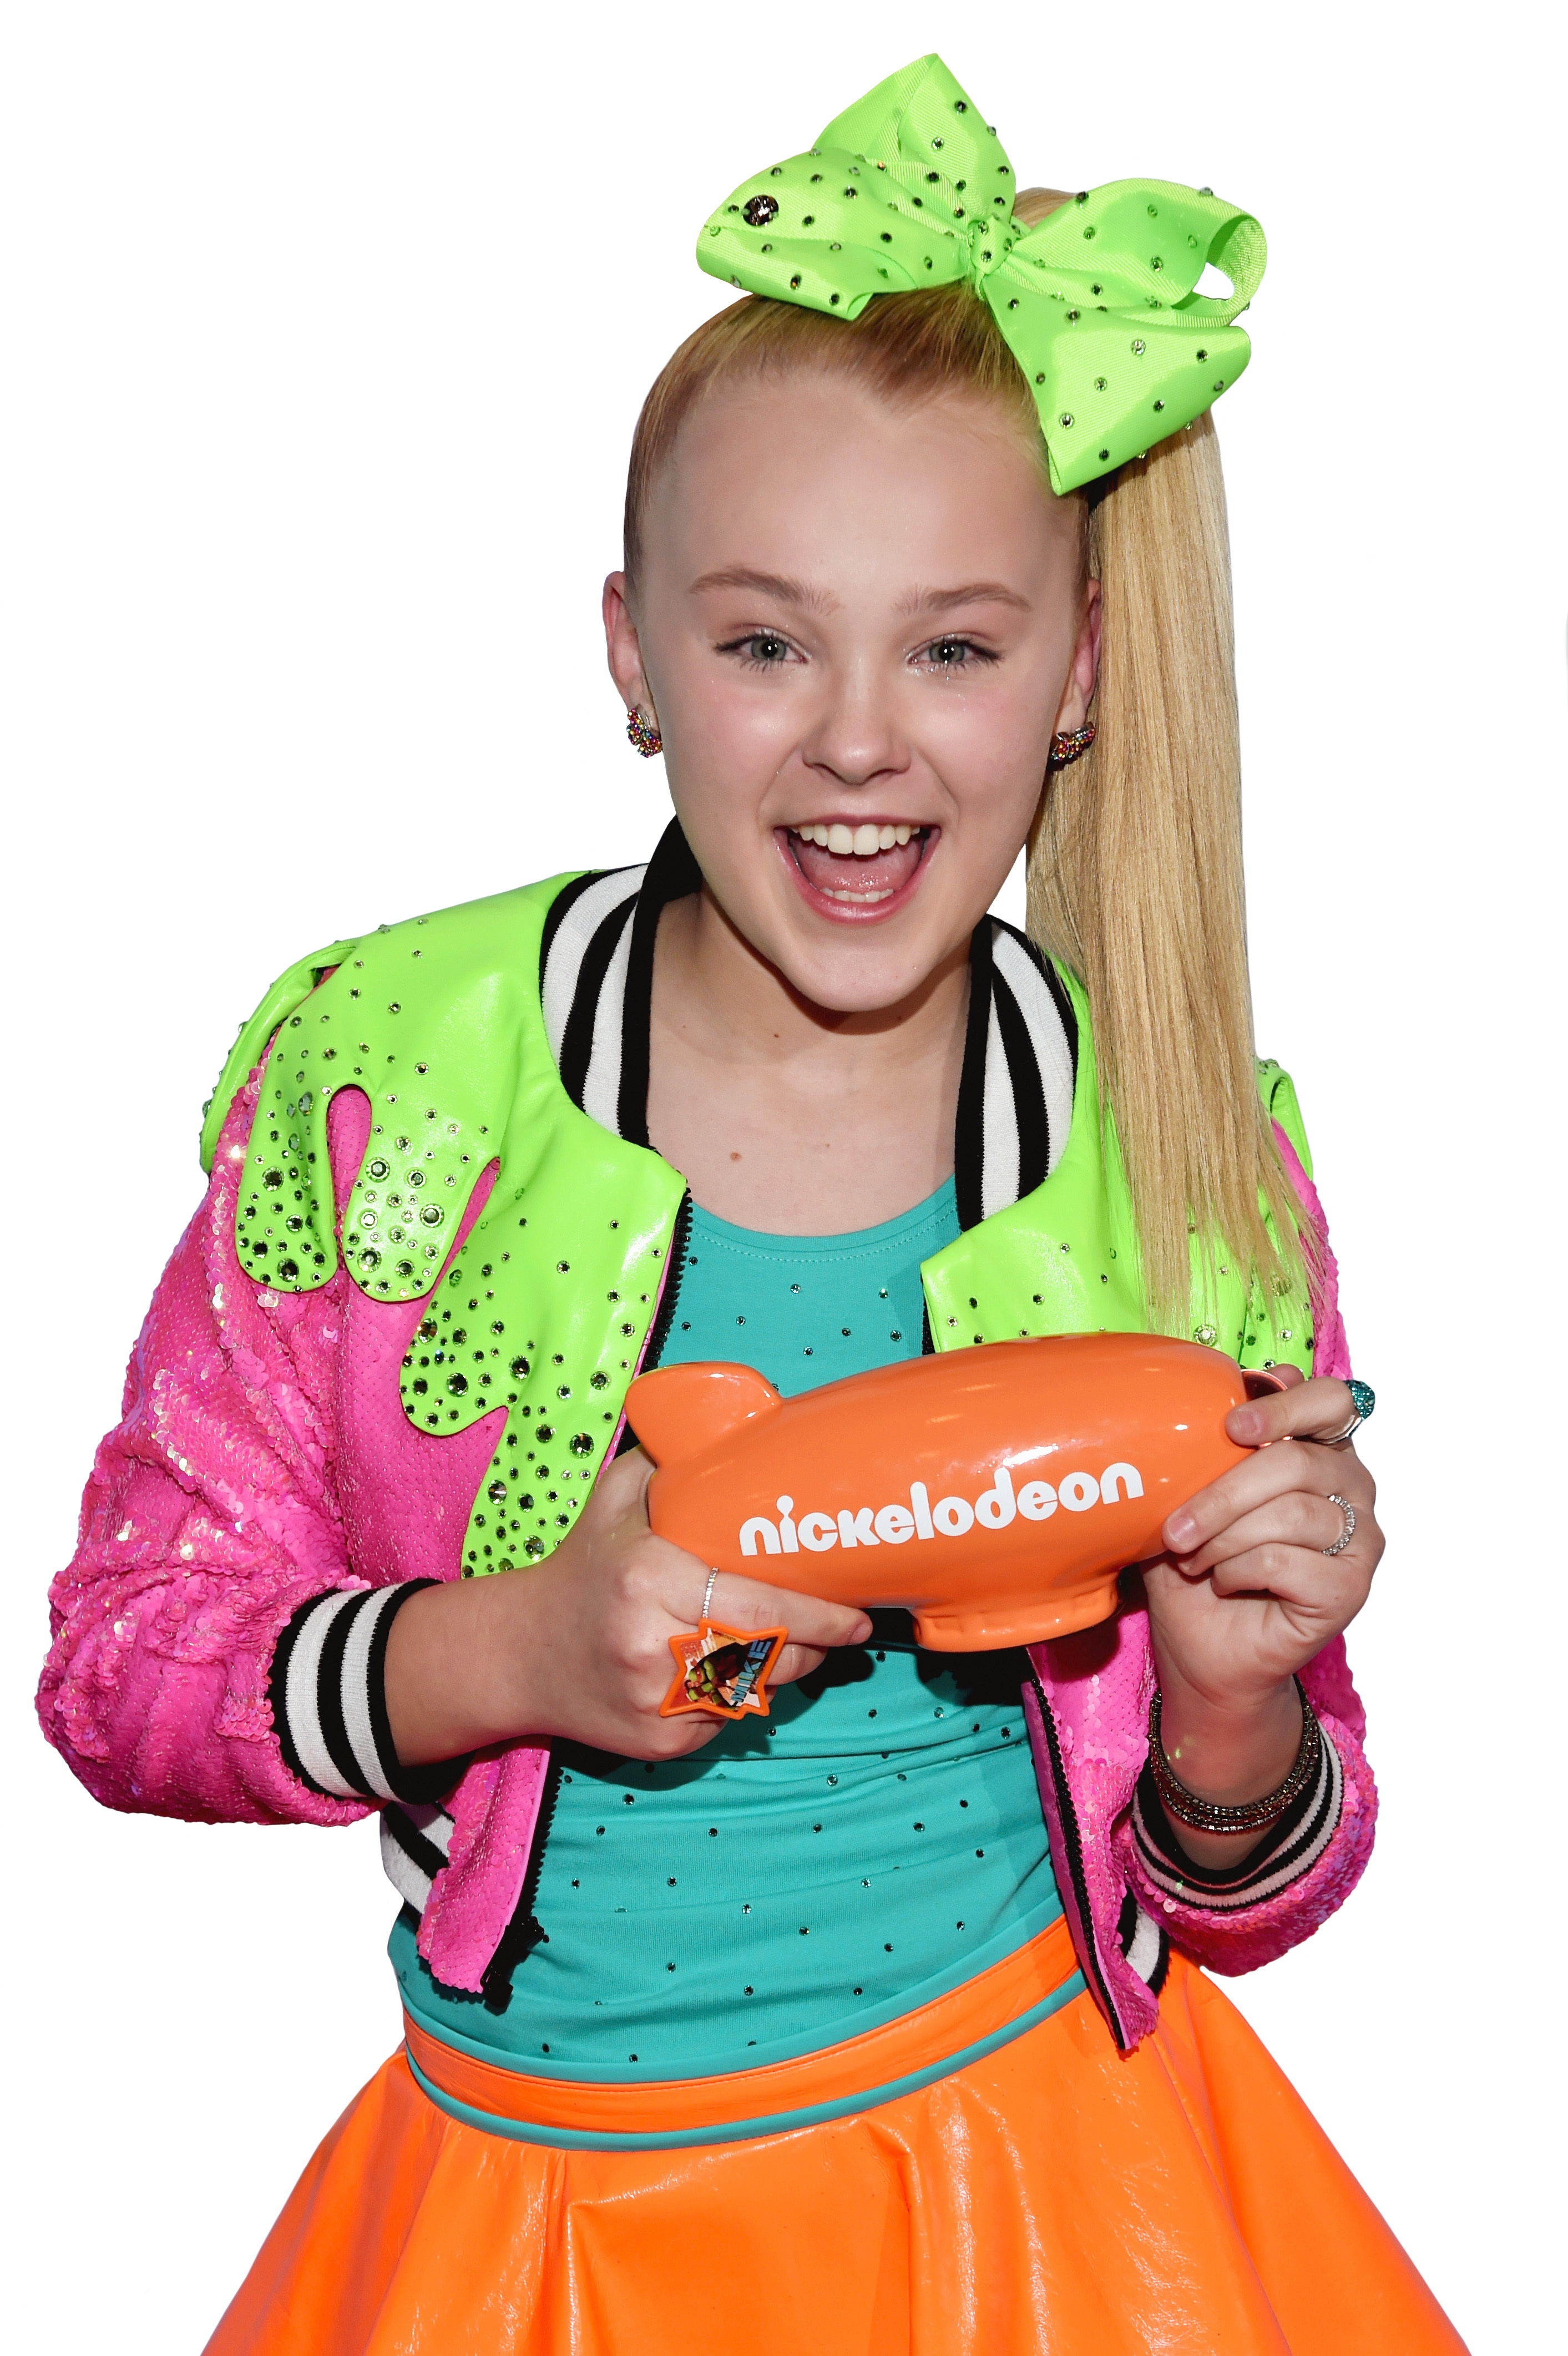 Nickelodeon Announces 2018 Kids’ Choice Awards Nominations | Business Wire